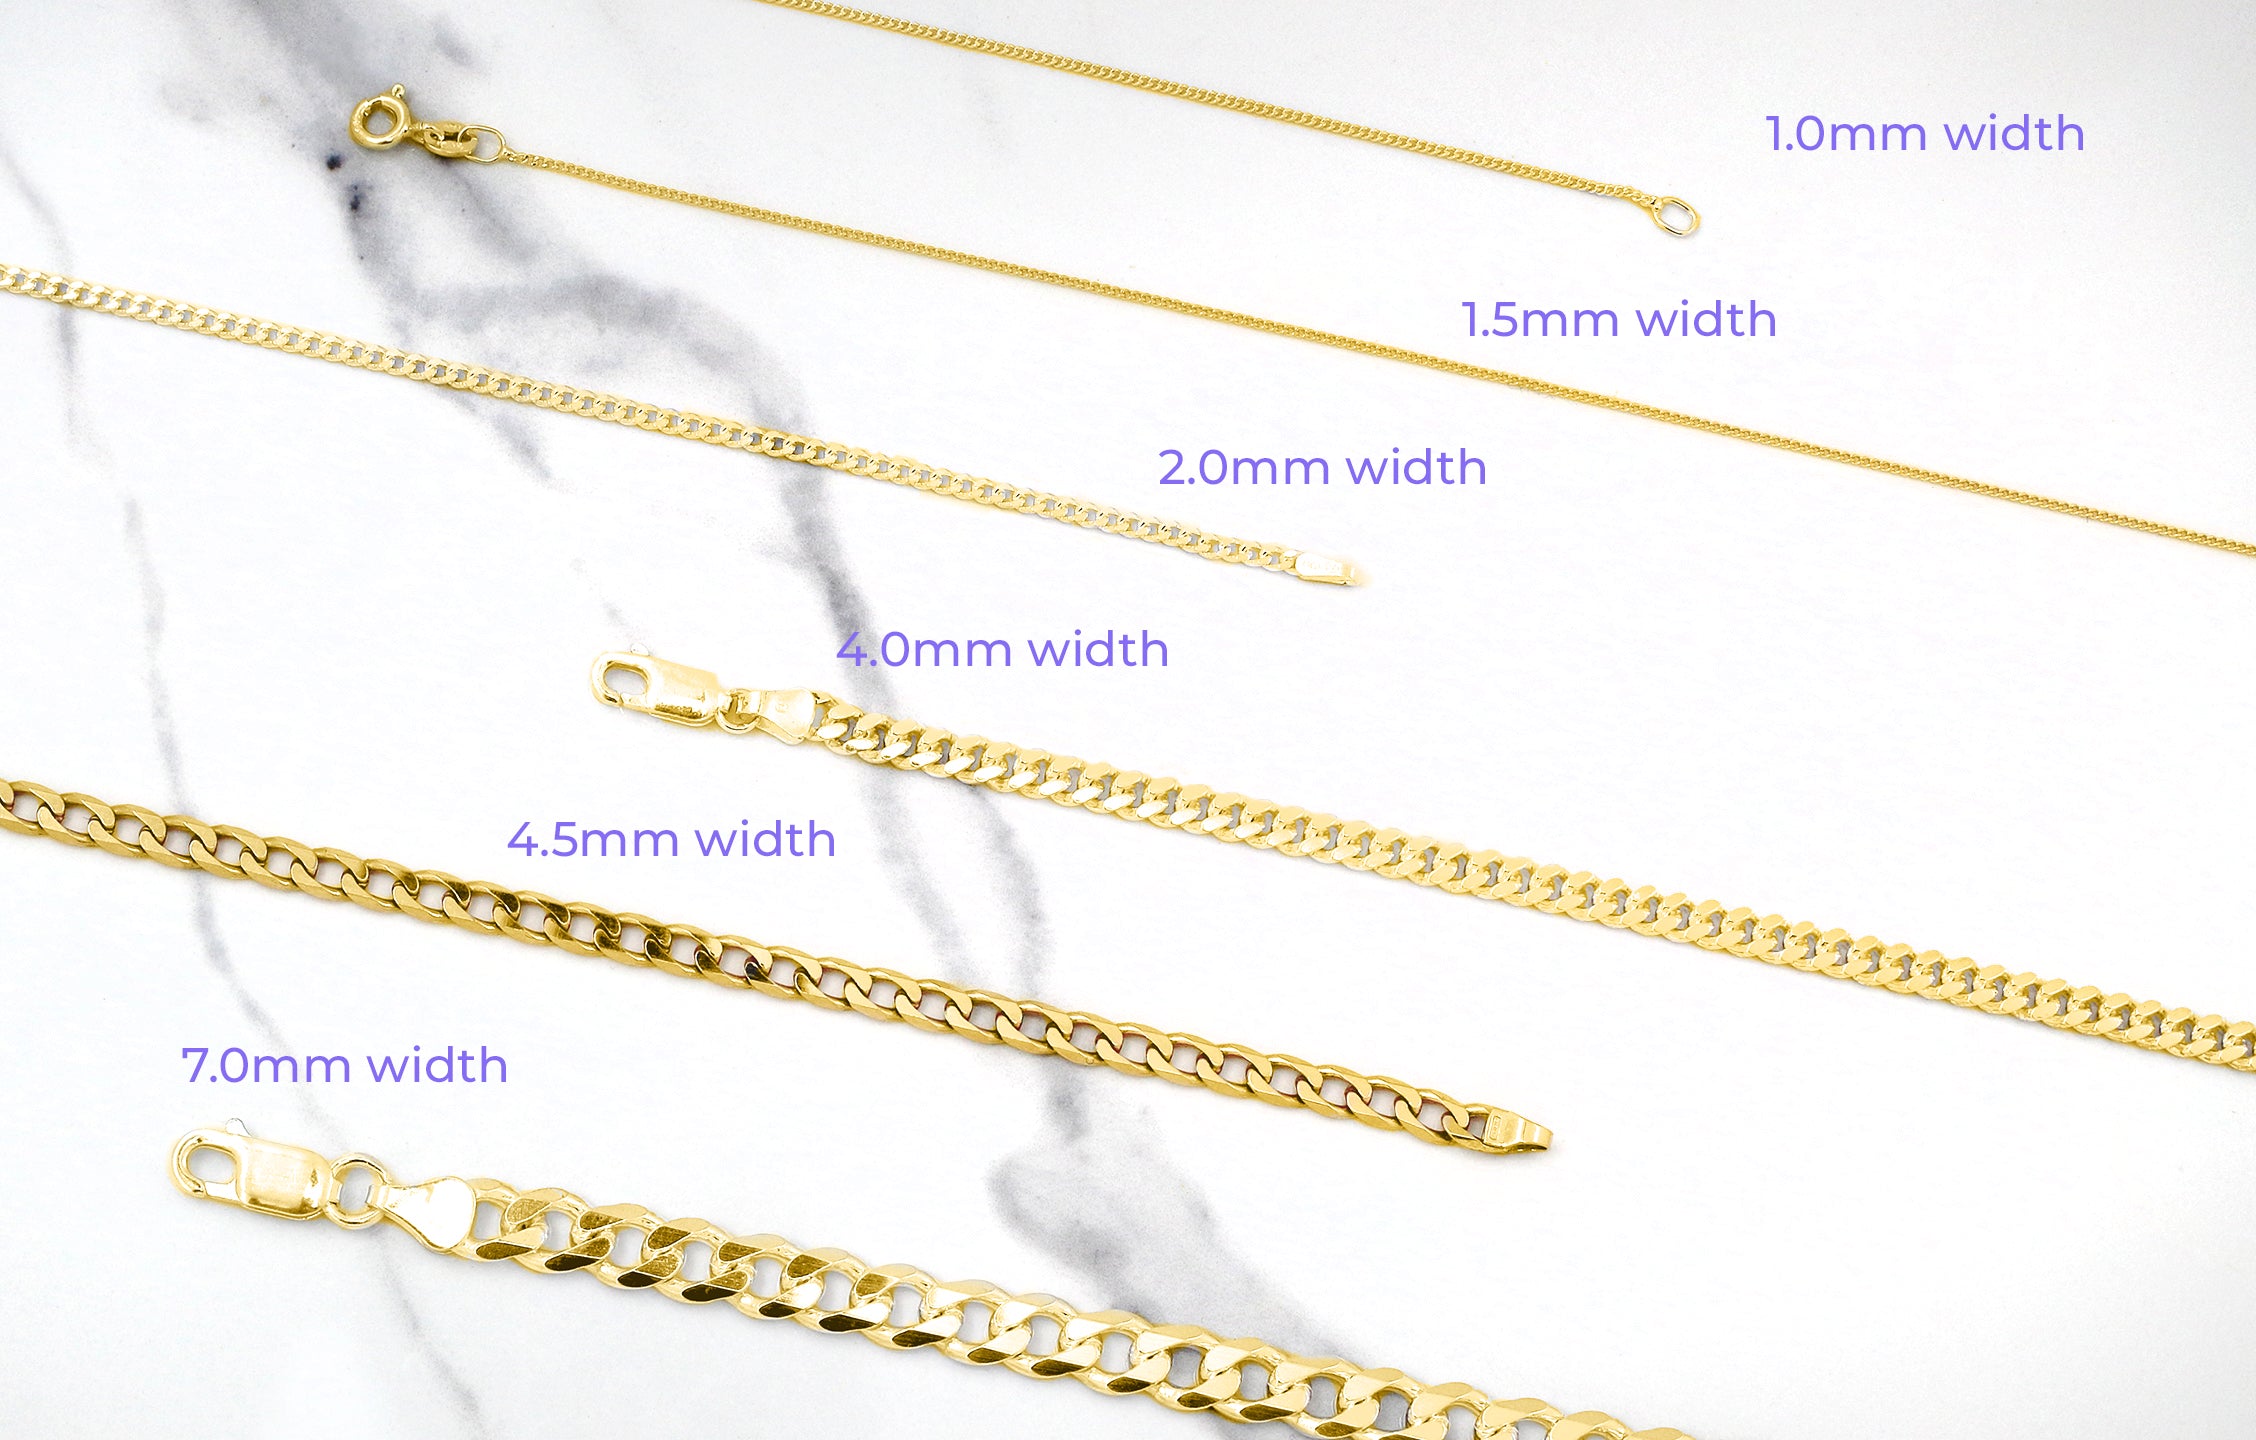 Gold Curb Chains in Different Widths Compared to Each Other